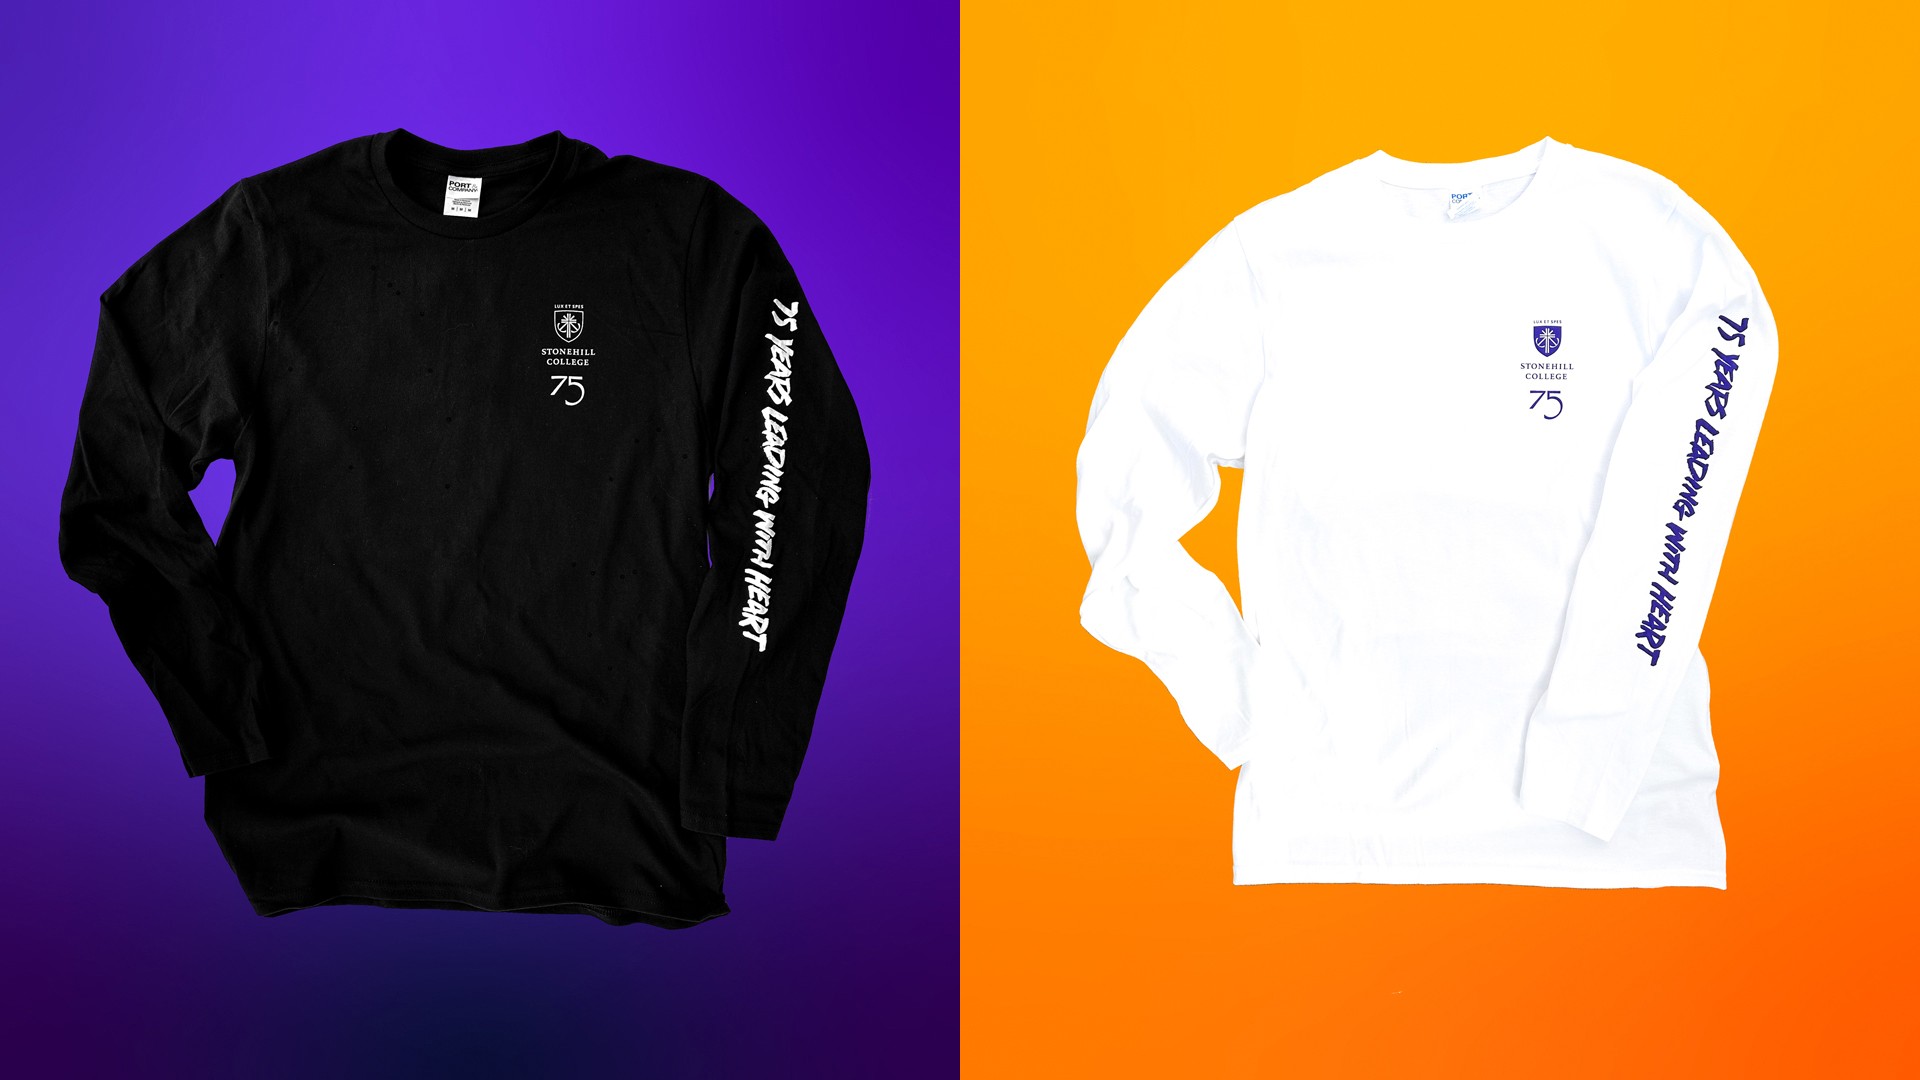 75th anniversary t-shirts (black on left, white on right)